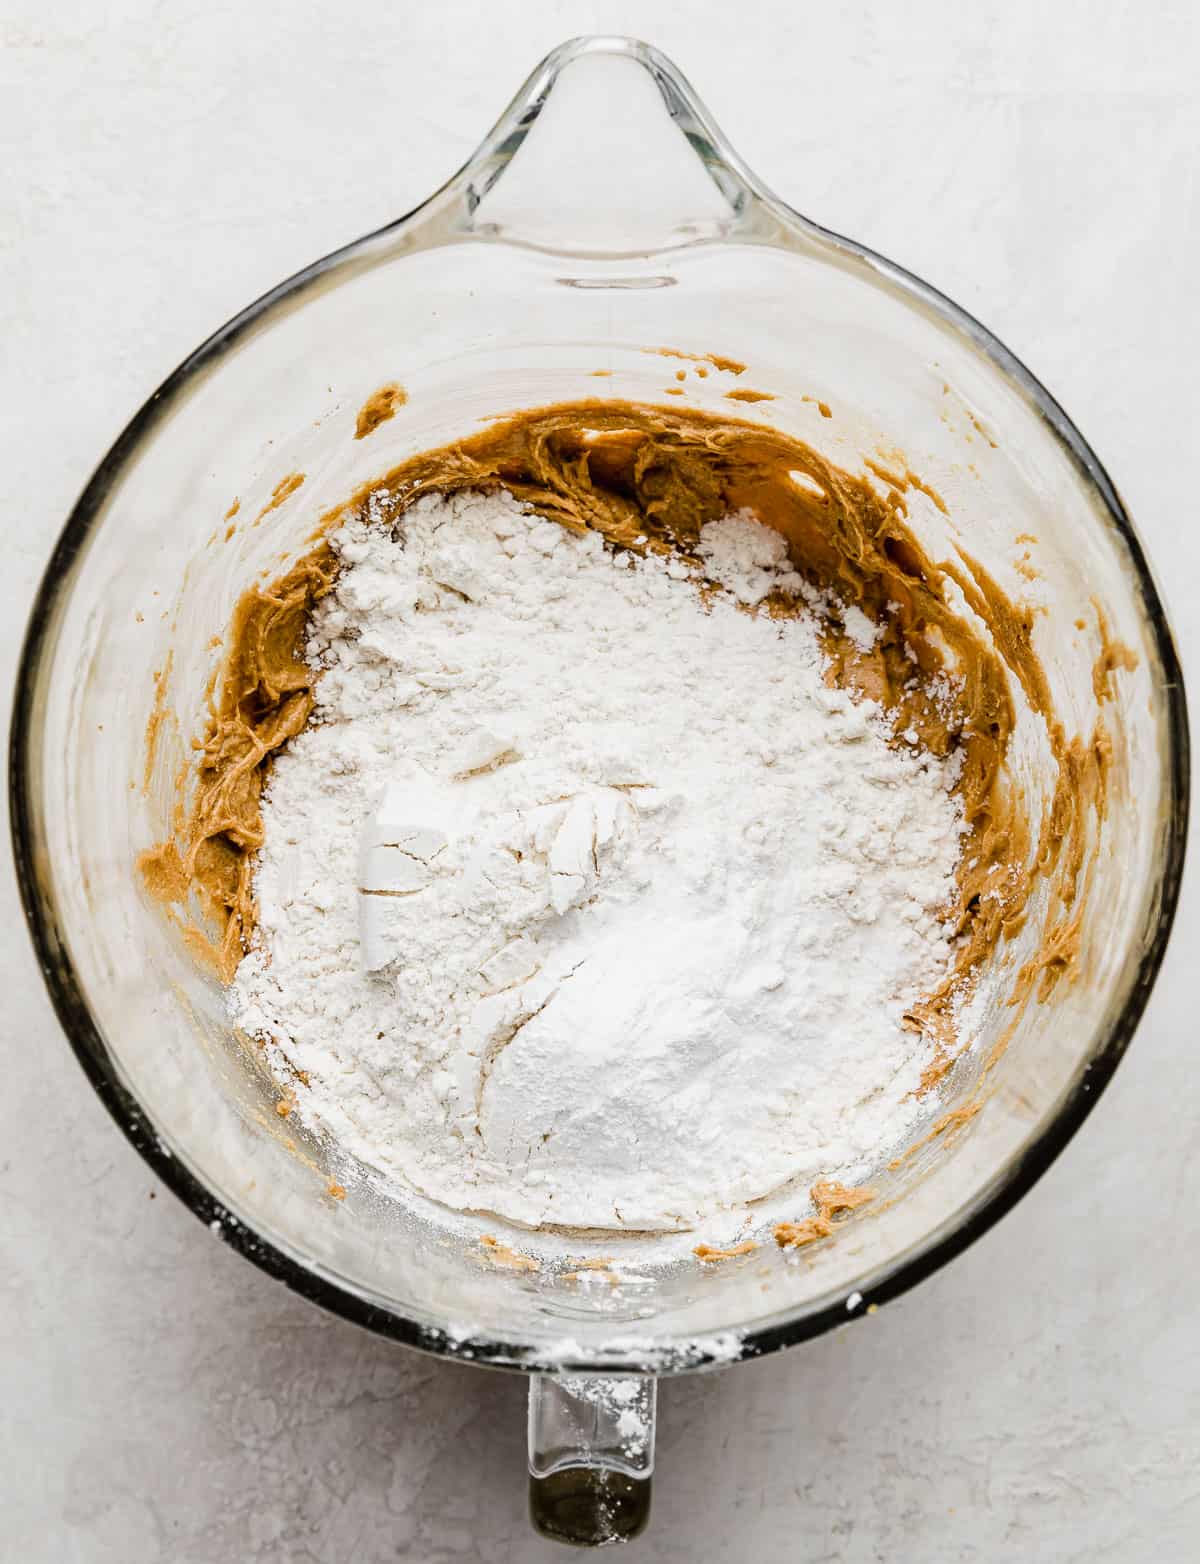 A white flour mixture on top of a deep brown colored creamed butter and sugar mixture.